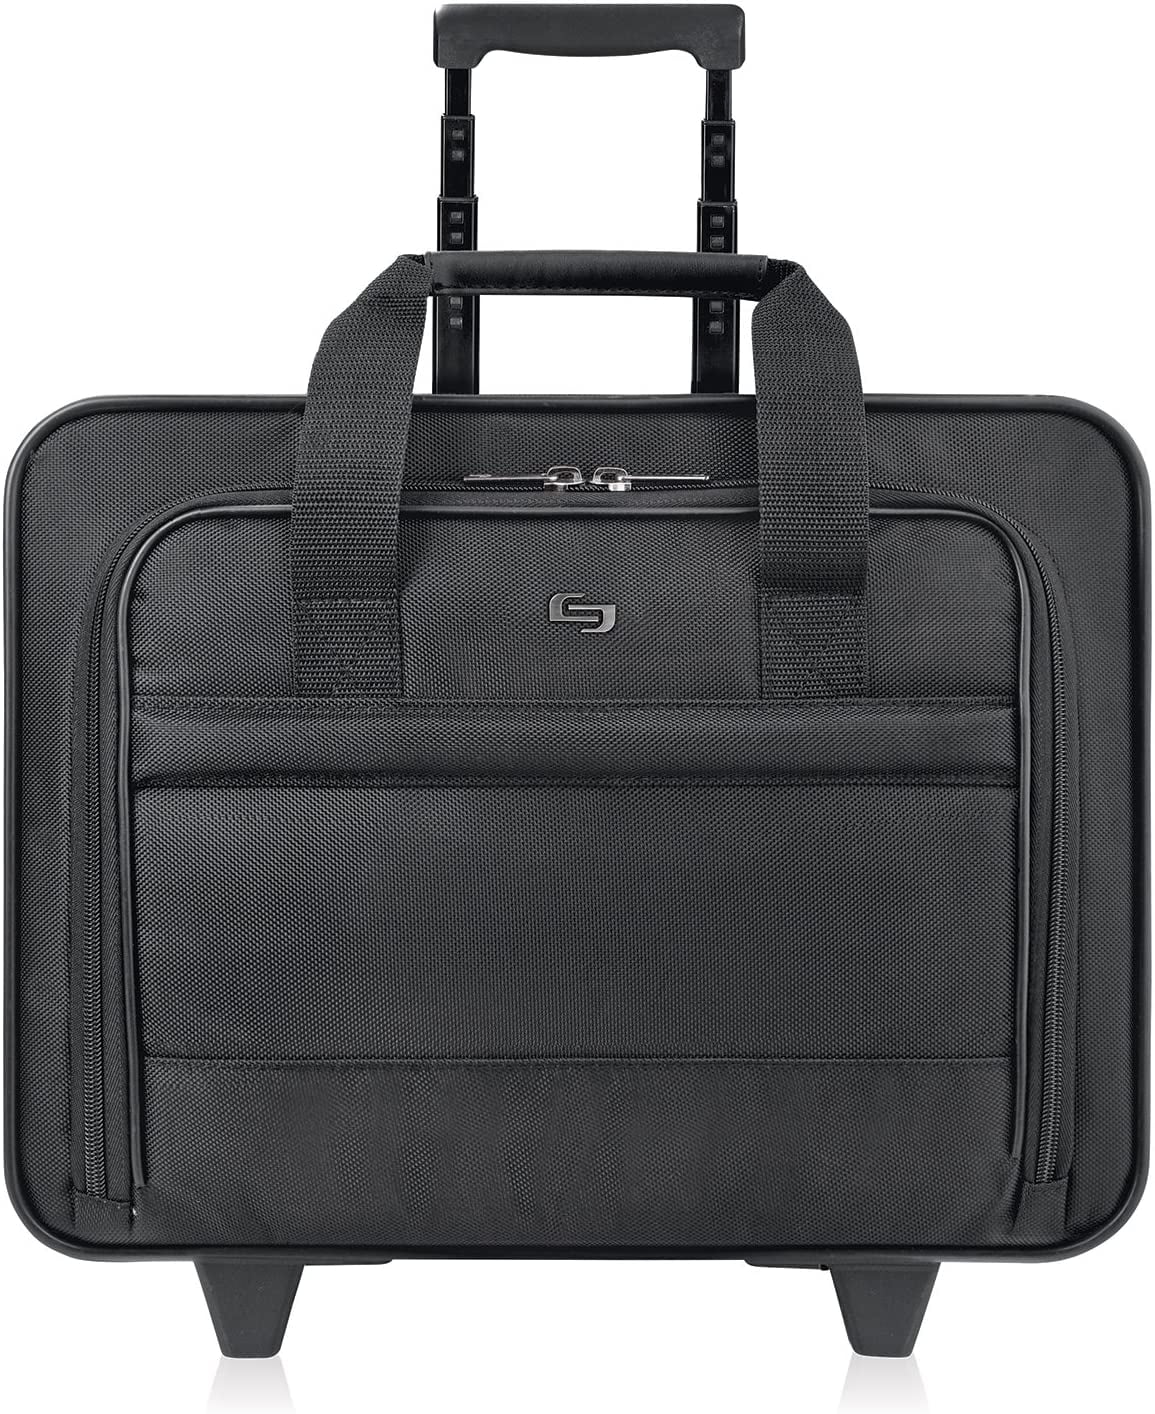 Solo Classic Collection 16 Inch Laptop Rolling Catalog Case Black Pv78-4 for sale online 